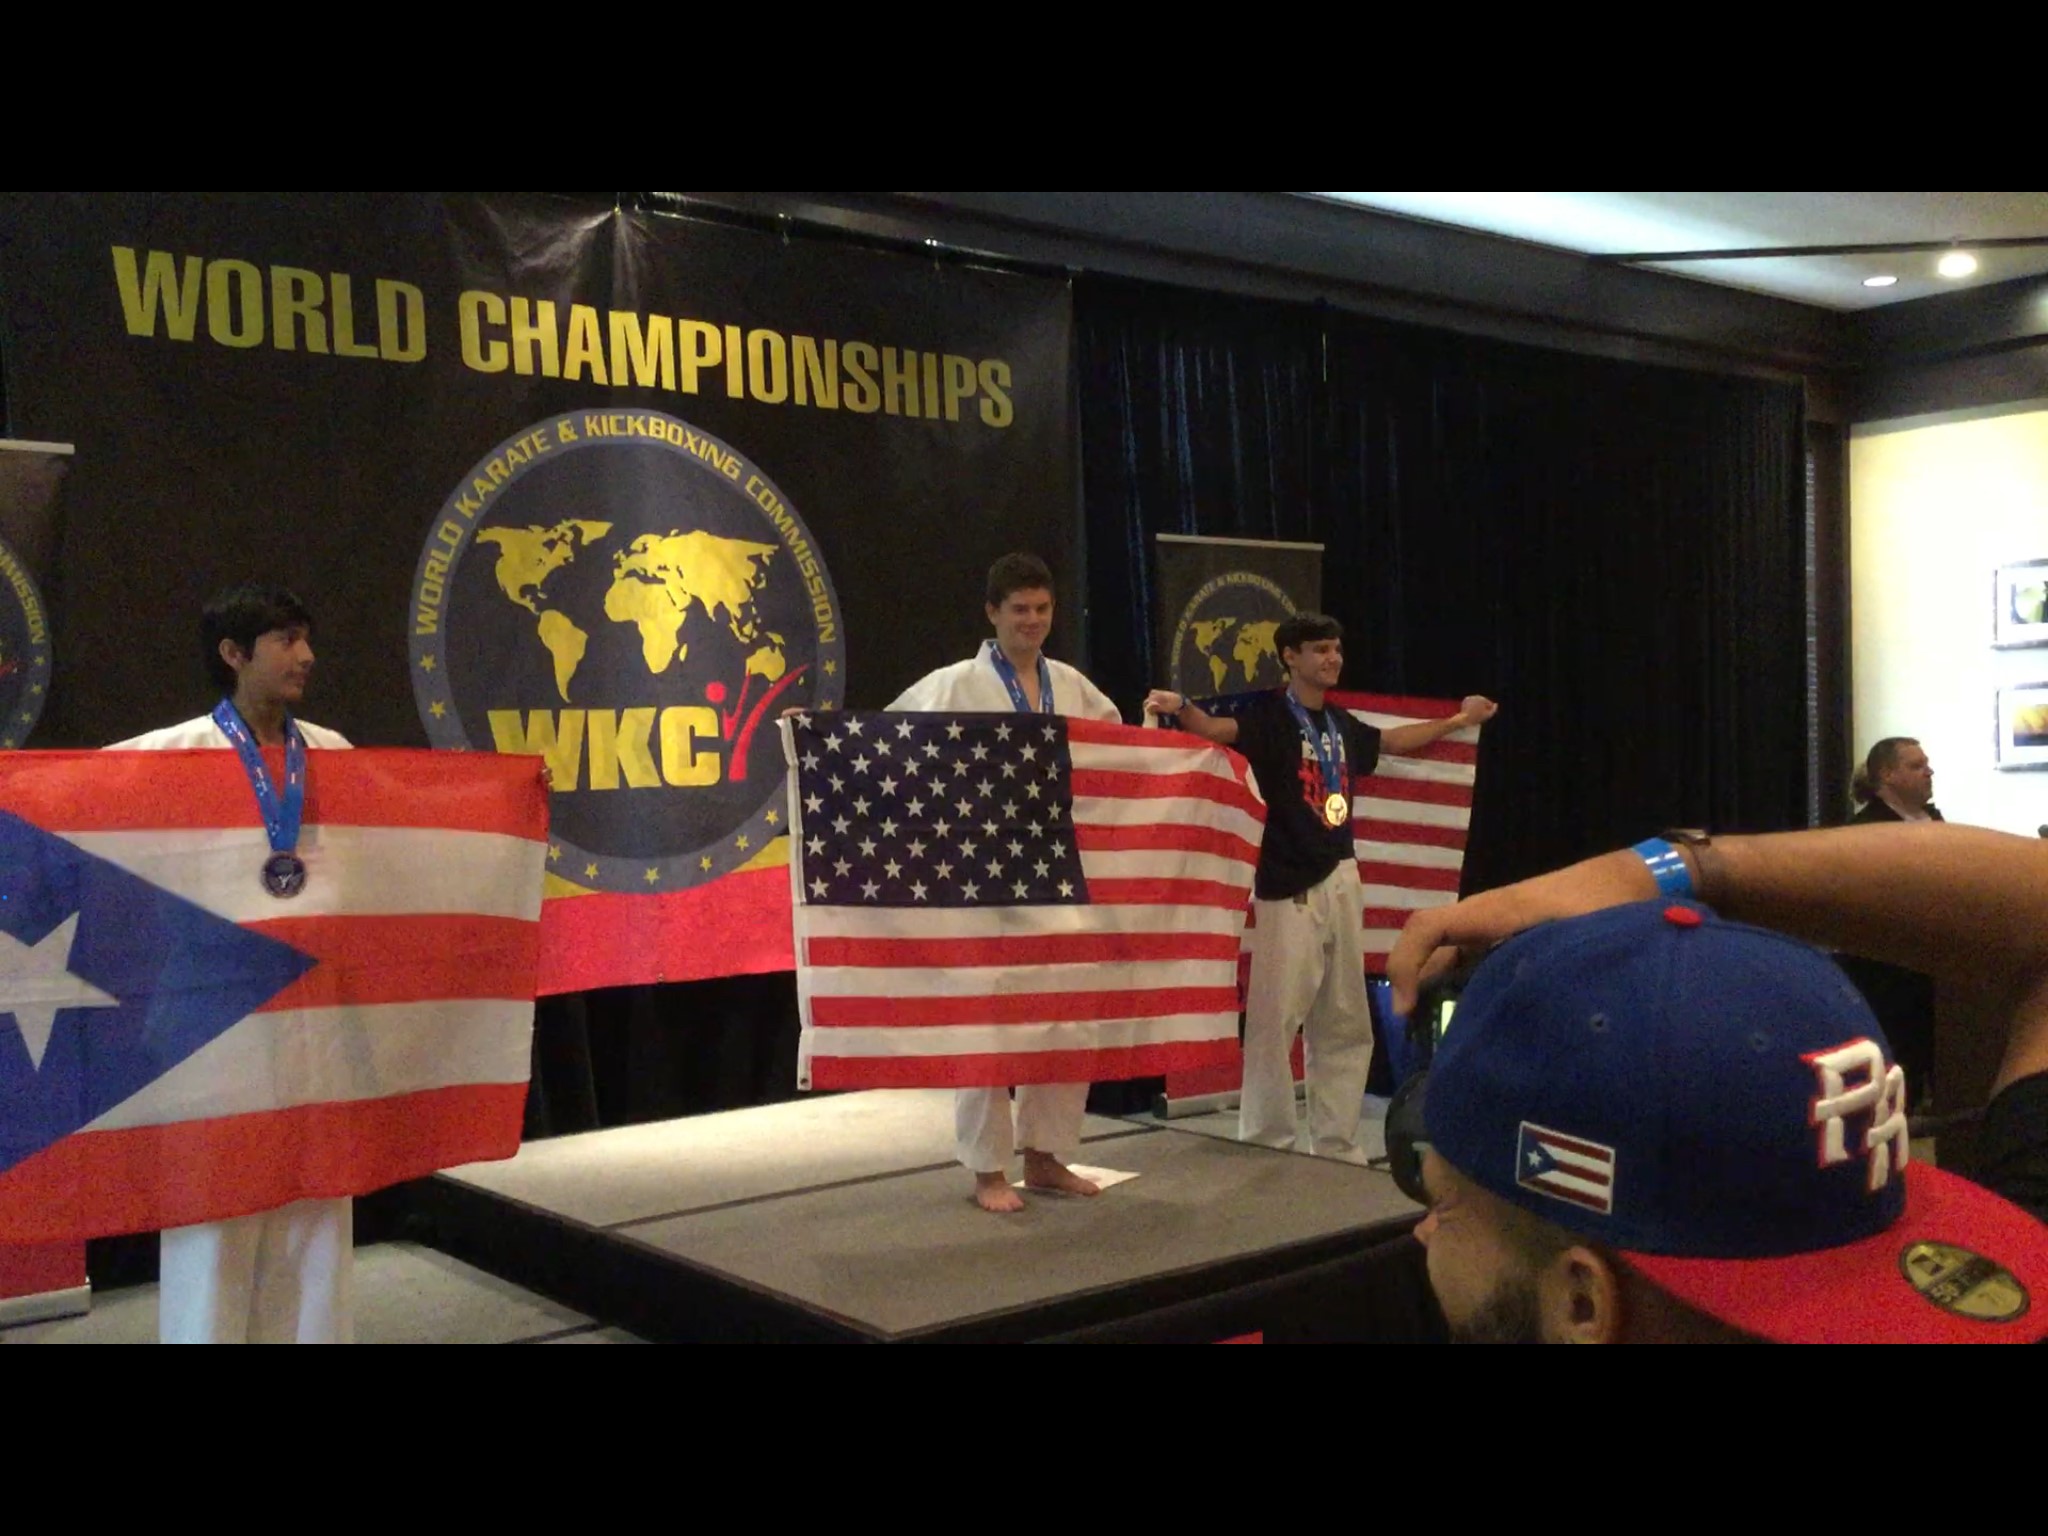 Eighth grader brings home the gold at Karate and Kickboxing World Championships